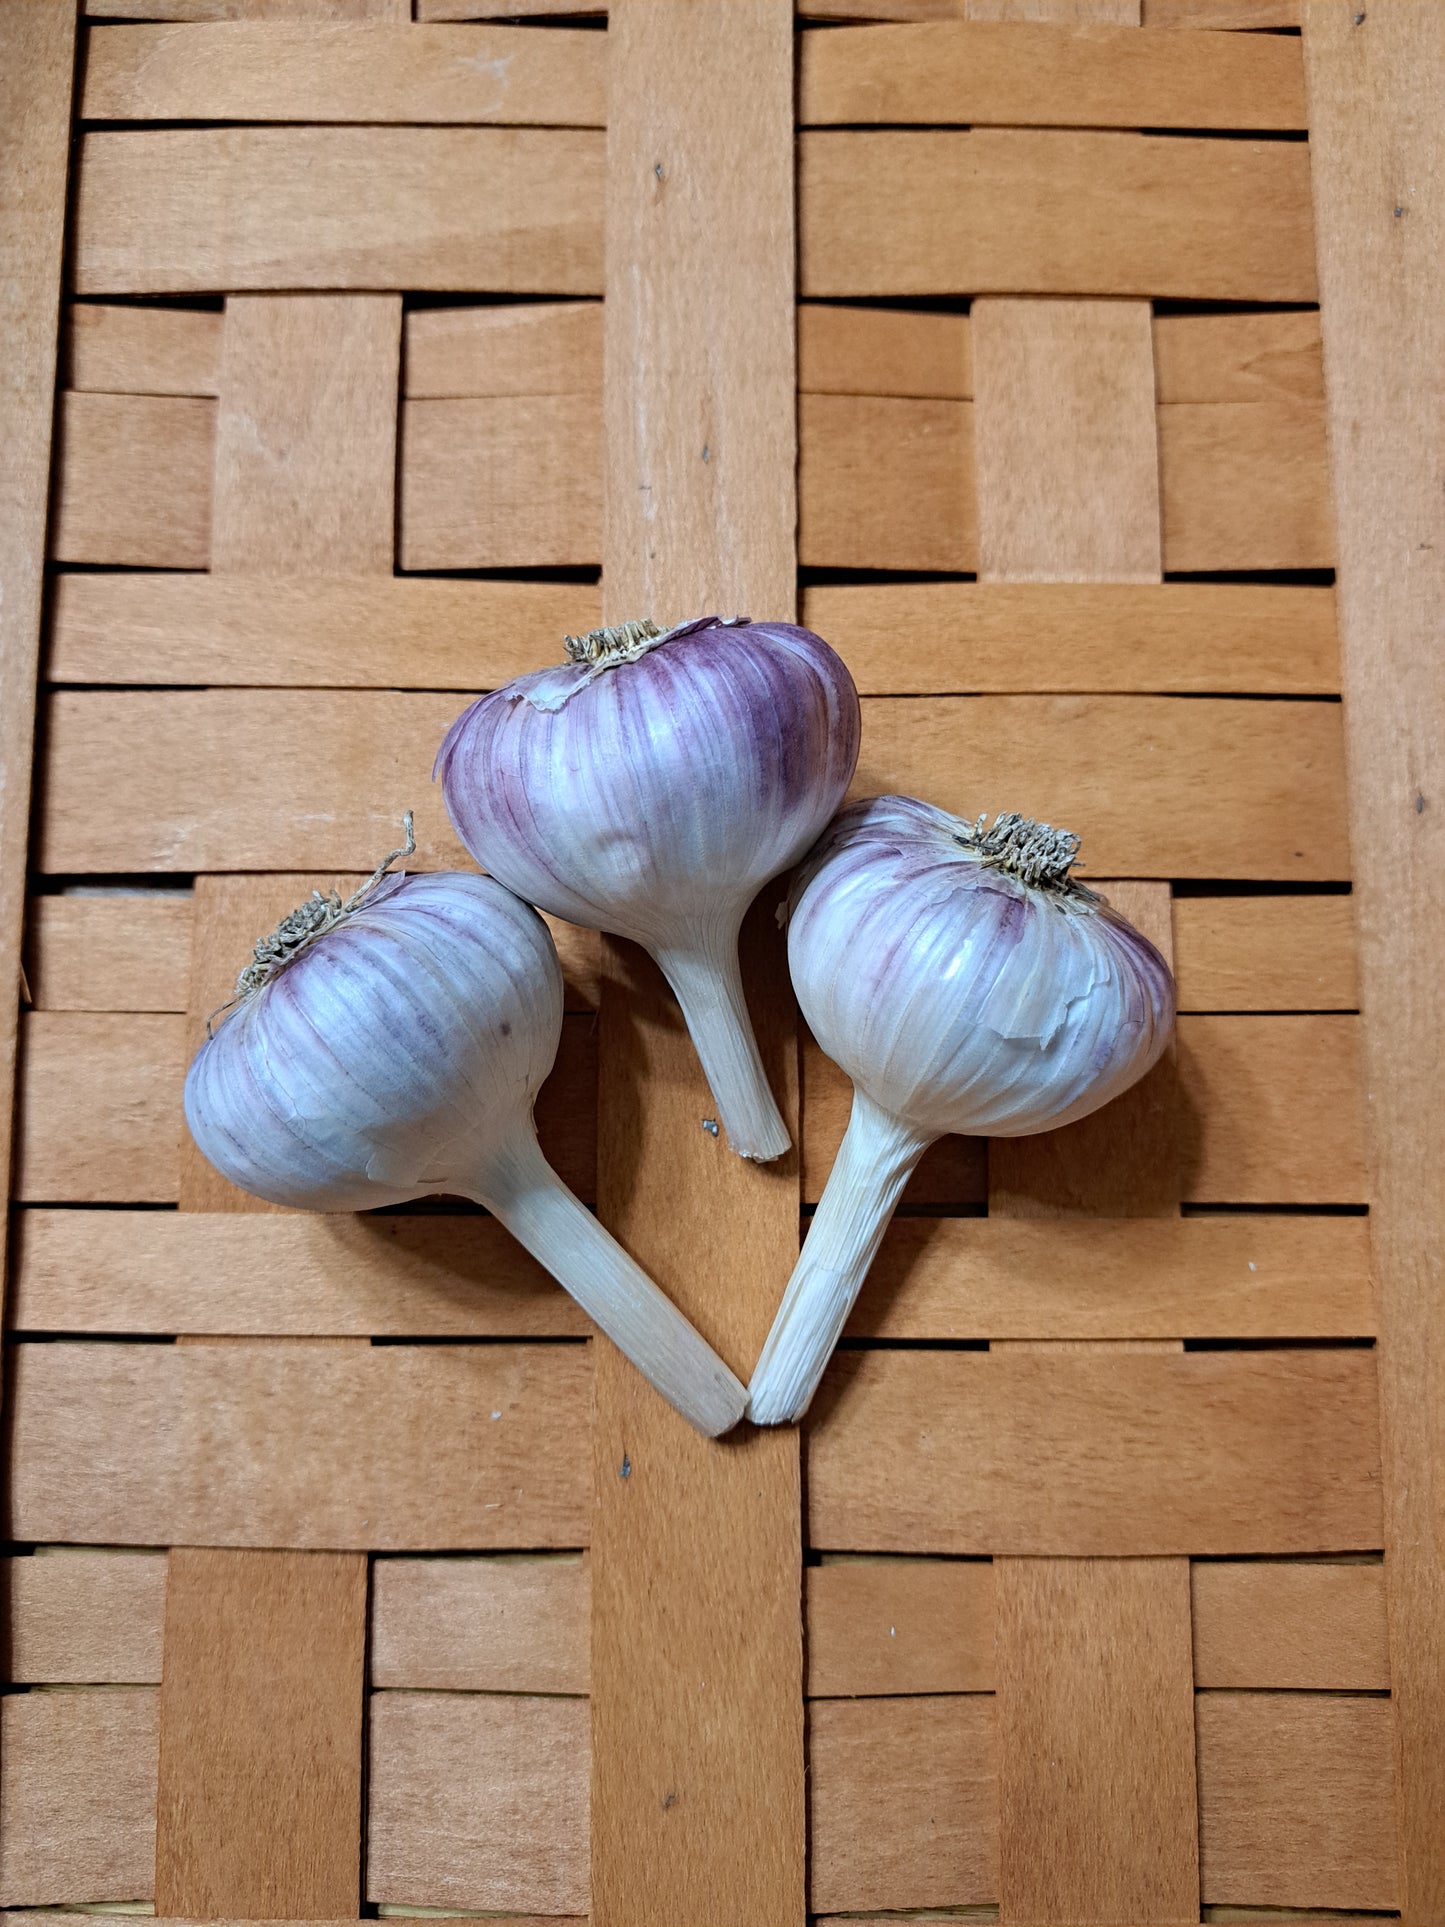 SIBERIAN (Marbled Purple Stripe Garlic) Excellent for all types of cooking.